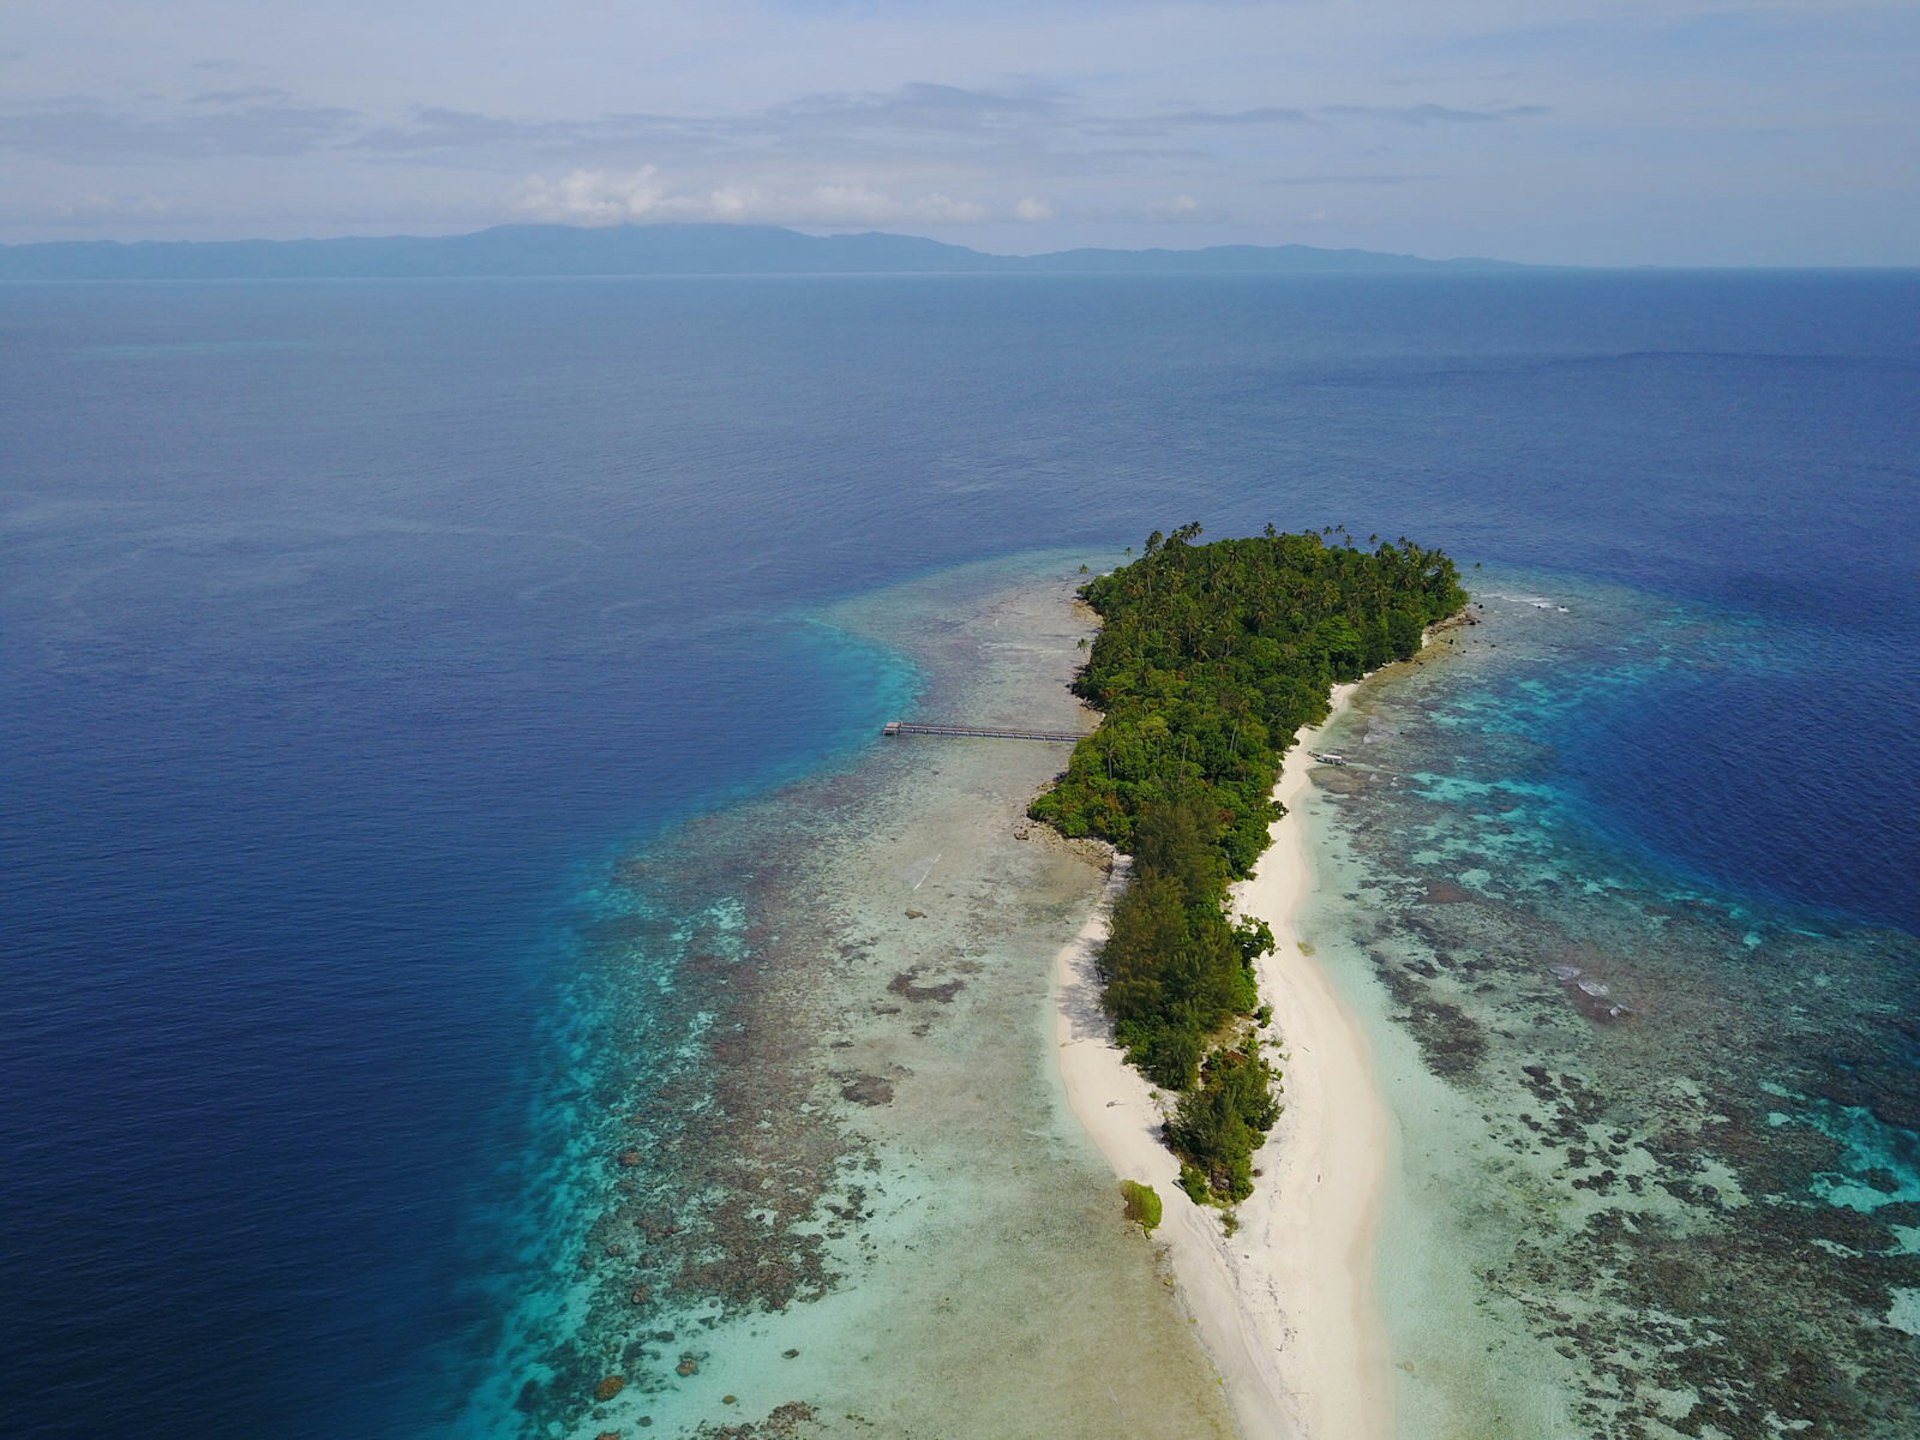 An aerial shot of Njari Island. A thin island with white sand beaches and dense forest inland surrounded by the bright blue Pacific Ocean